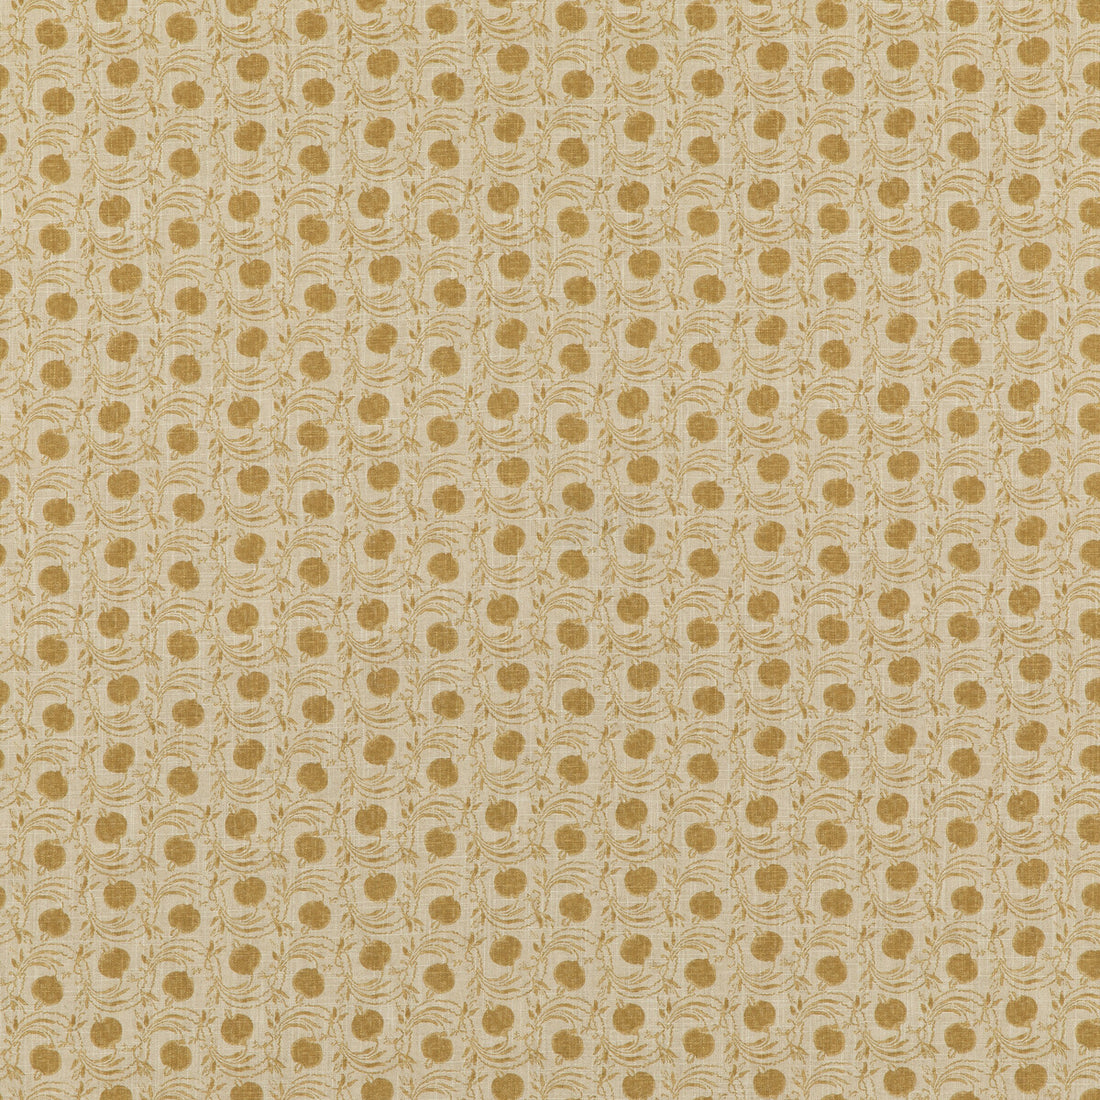 Seed Pod fabric in ochre color - pattern BP10824.3.0 - by G P &amp; J Baker in the Coromandel Small Prints collection